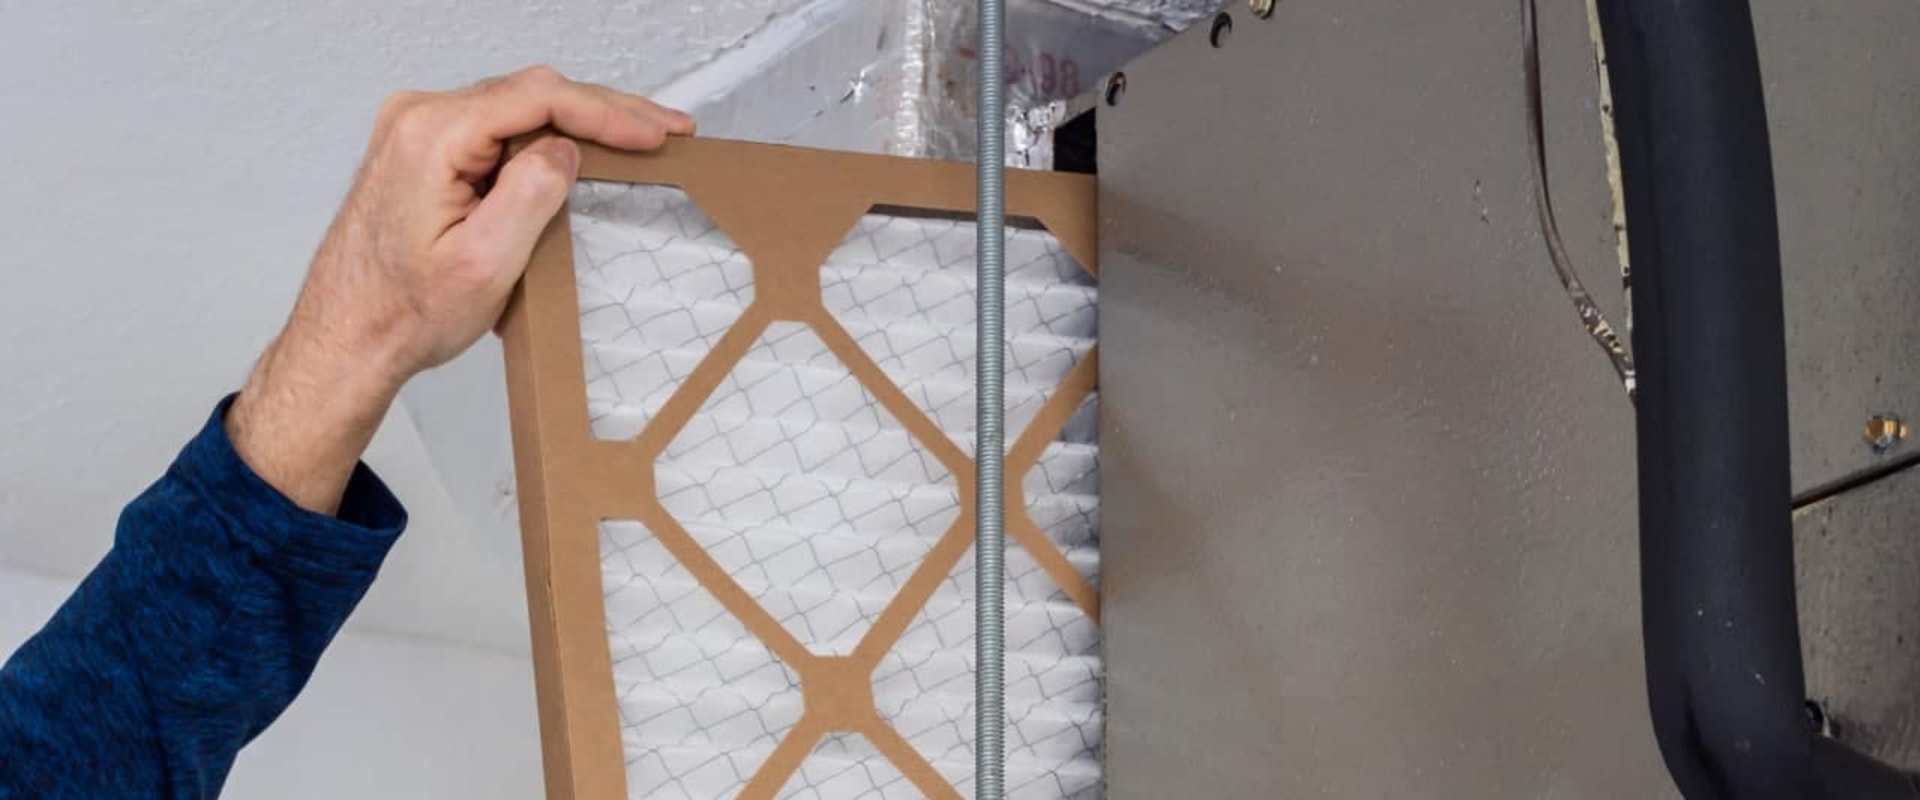 How Often Should You Change Your 20x25x4 Furnace Filter?